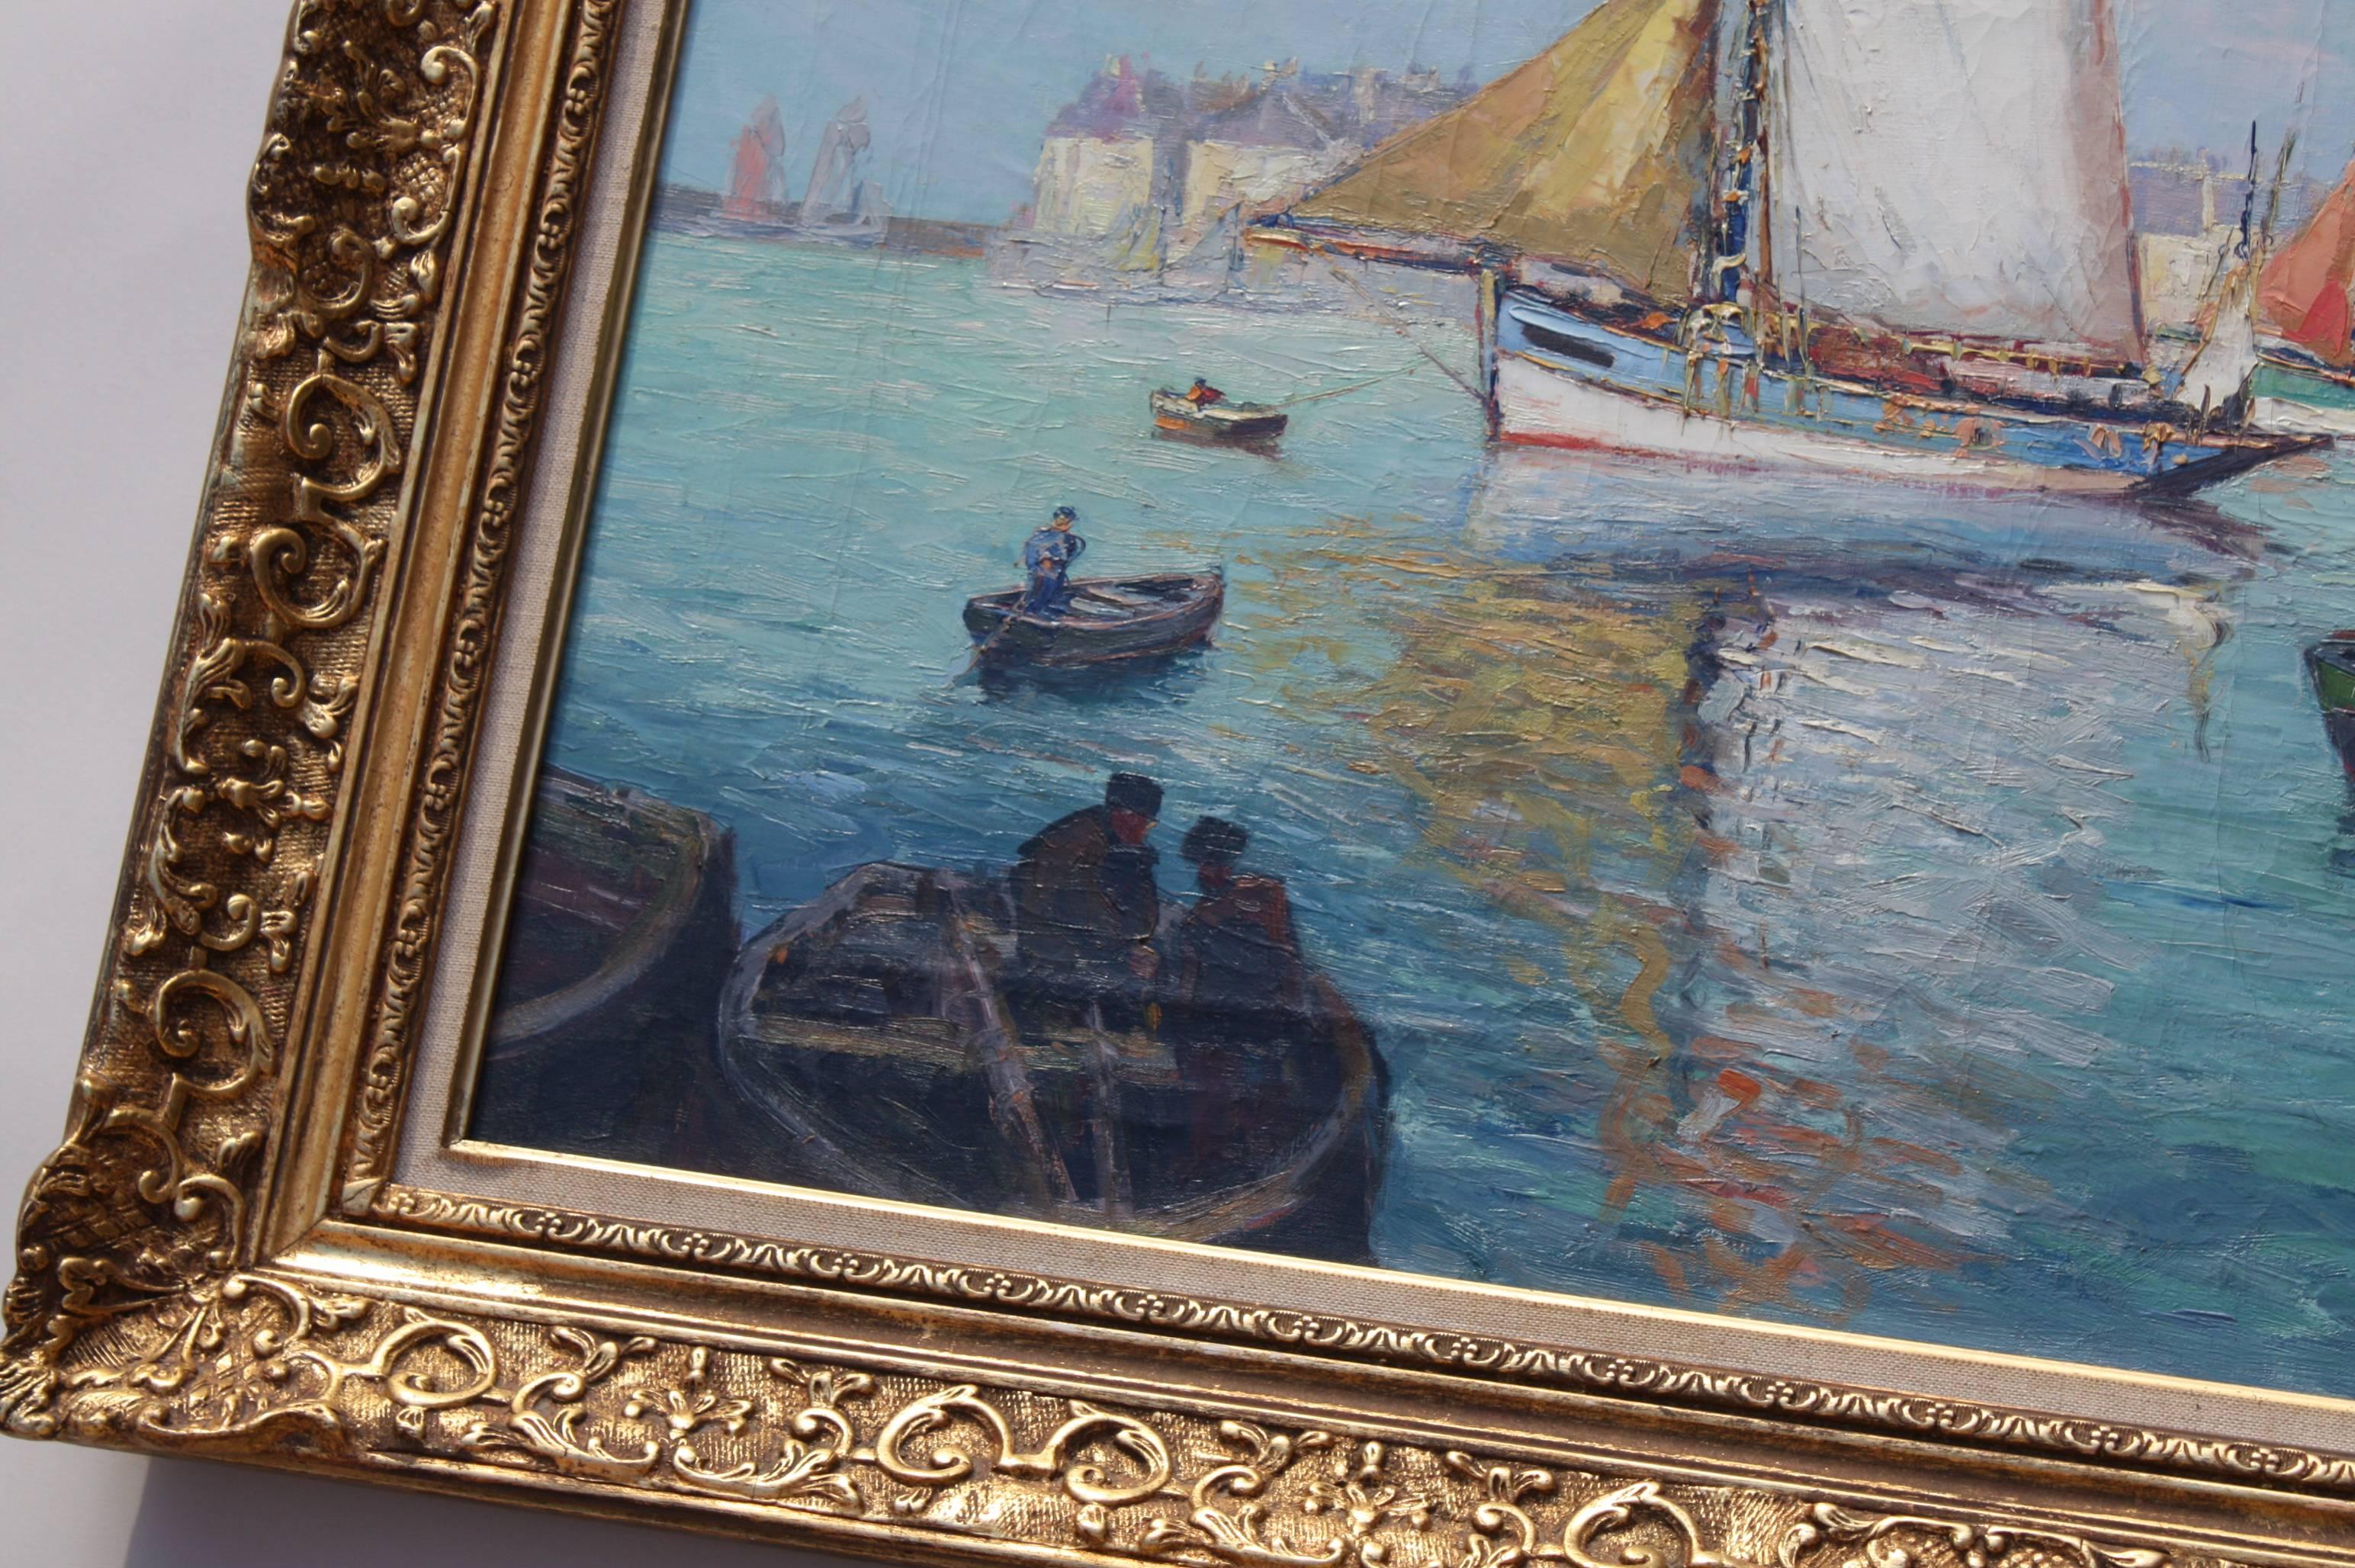 This beautiful impressionistic displays a wonderful scene of boats on the sea. Its small thin, yet visible brush strokes, shadows and vivid contrasting colors exhibit the recognizable impressionist style. 

Unfortunately we are unable to